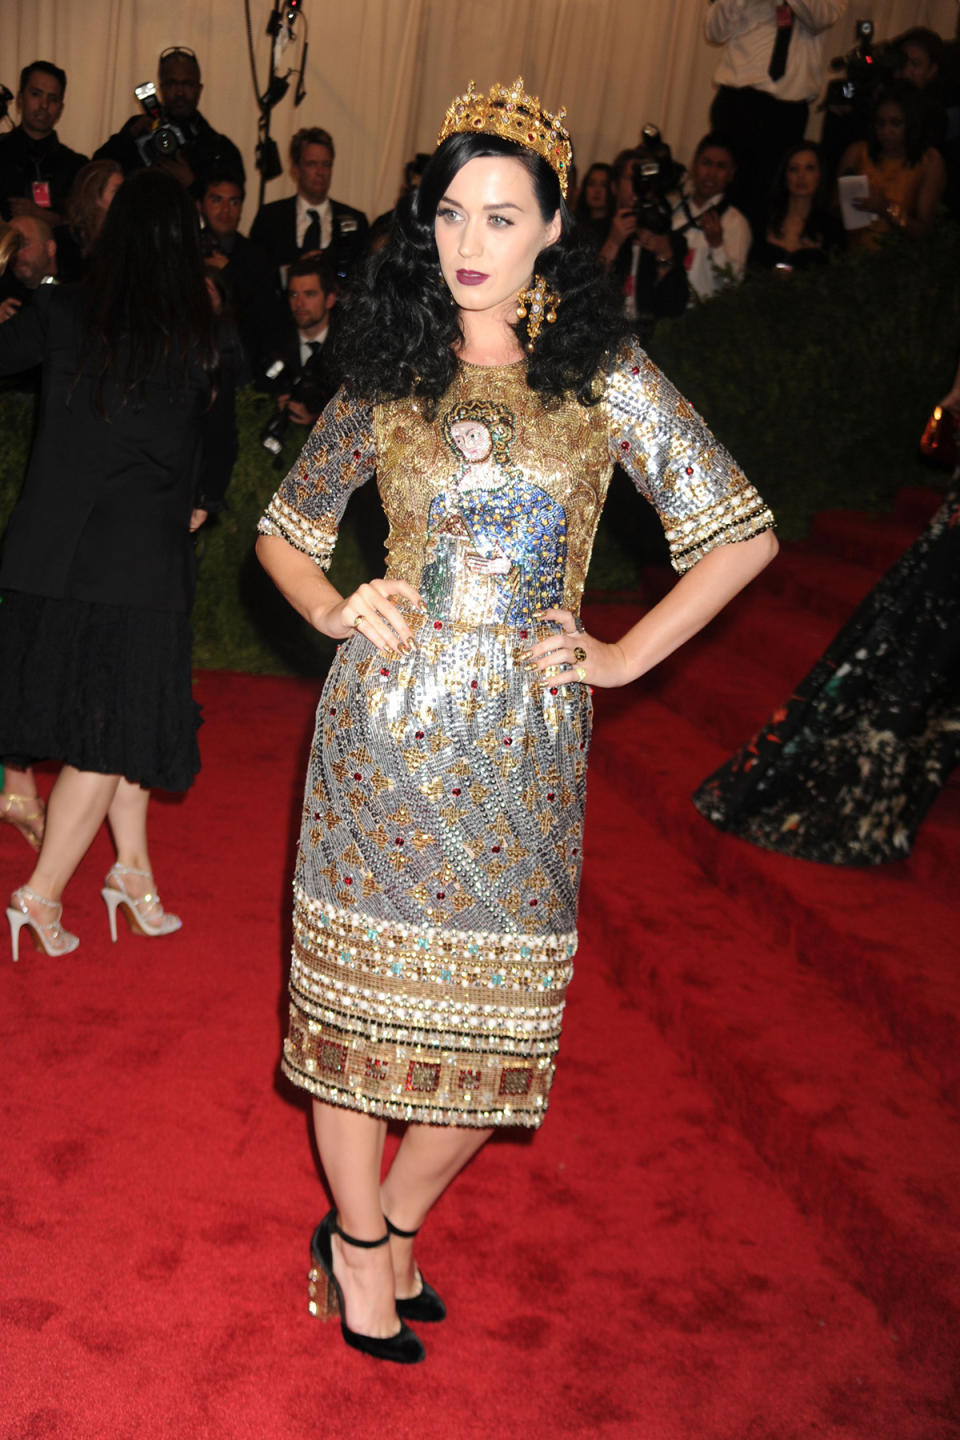 Katy Perry attends the 'Punk': Chaos to Couture' Costume Institute Benefit Met Gala at the Metropolitan Museum in New York.   (Photo by Dennis Van Tine/PA Images via Getty Images)